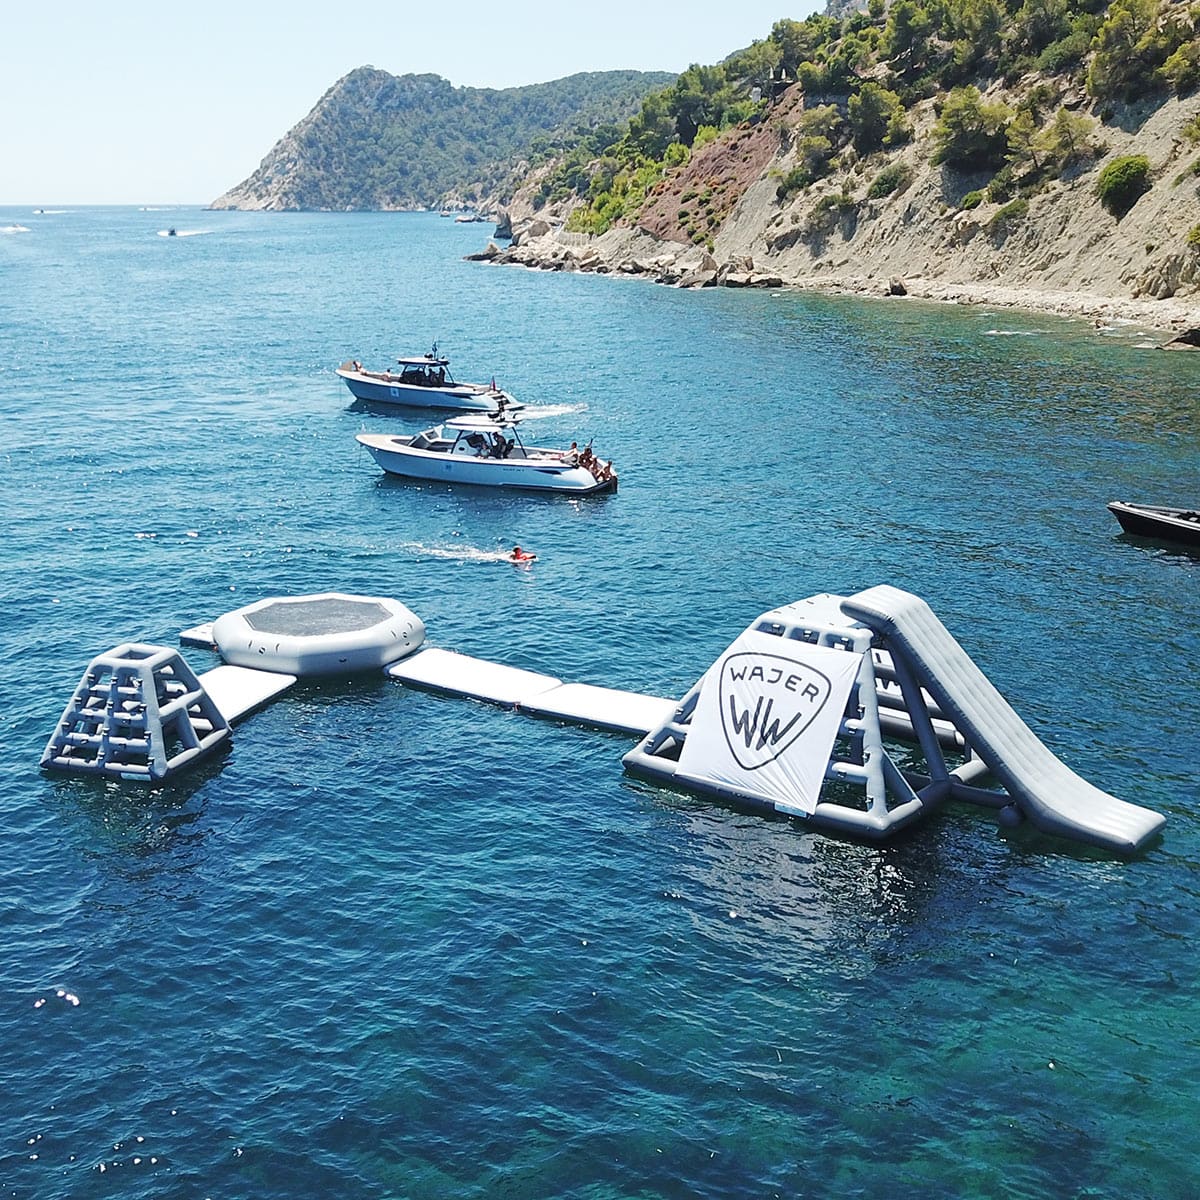 An inflatable aqua park set up close to the shoreline with small boats nearby